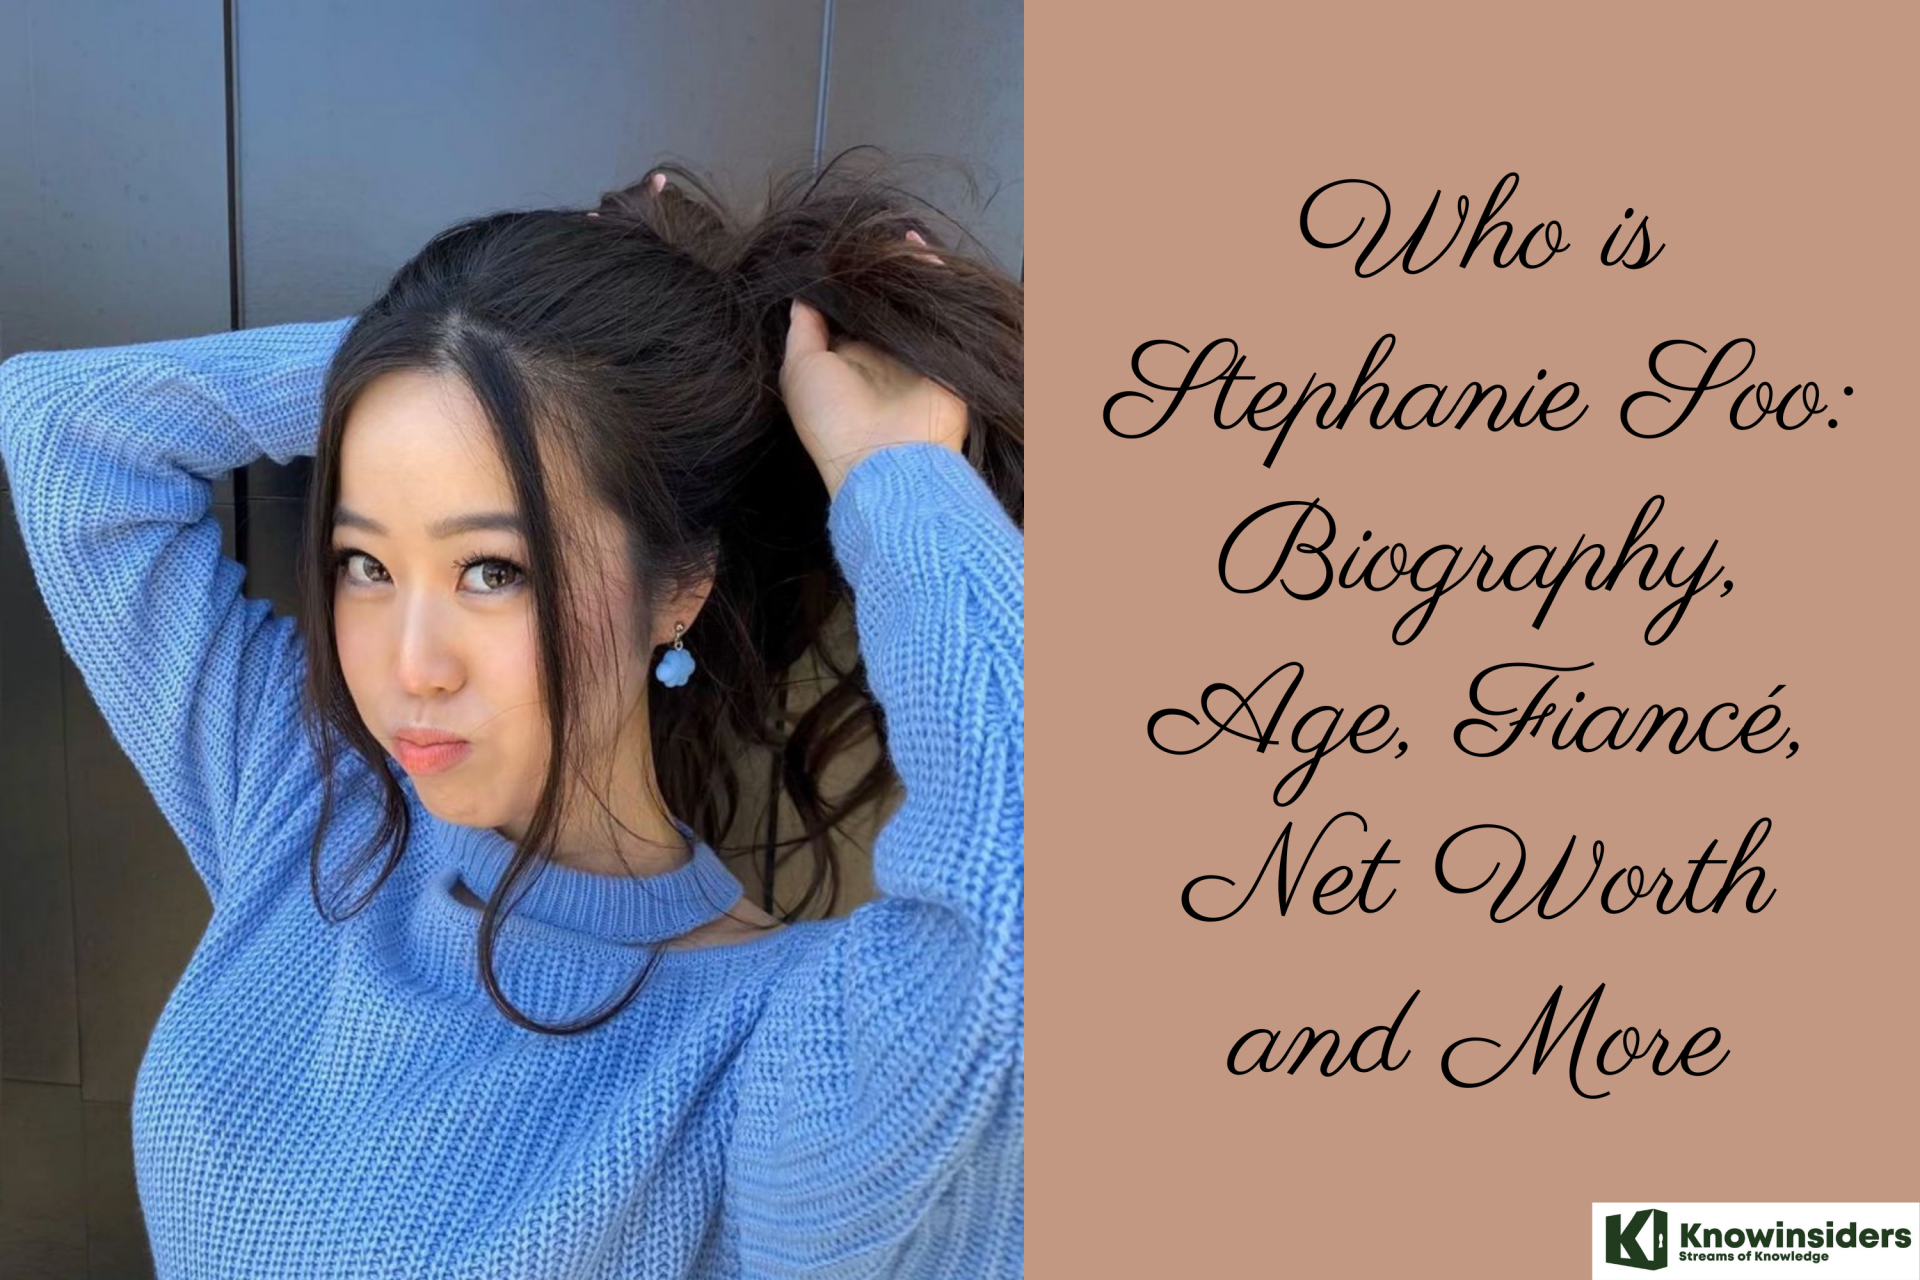 Who is Stephanie Soo: Biography, Age, Fiancé, Net Worth and More